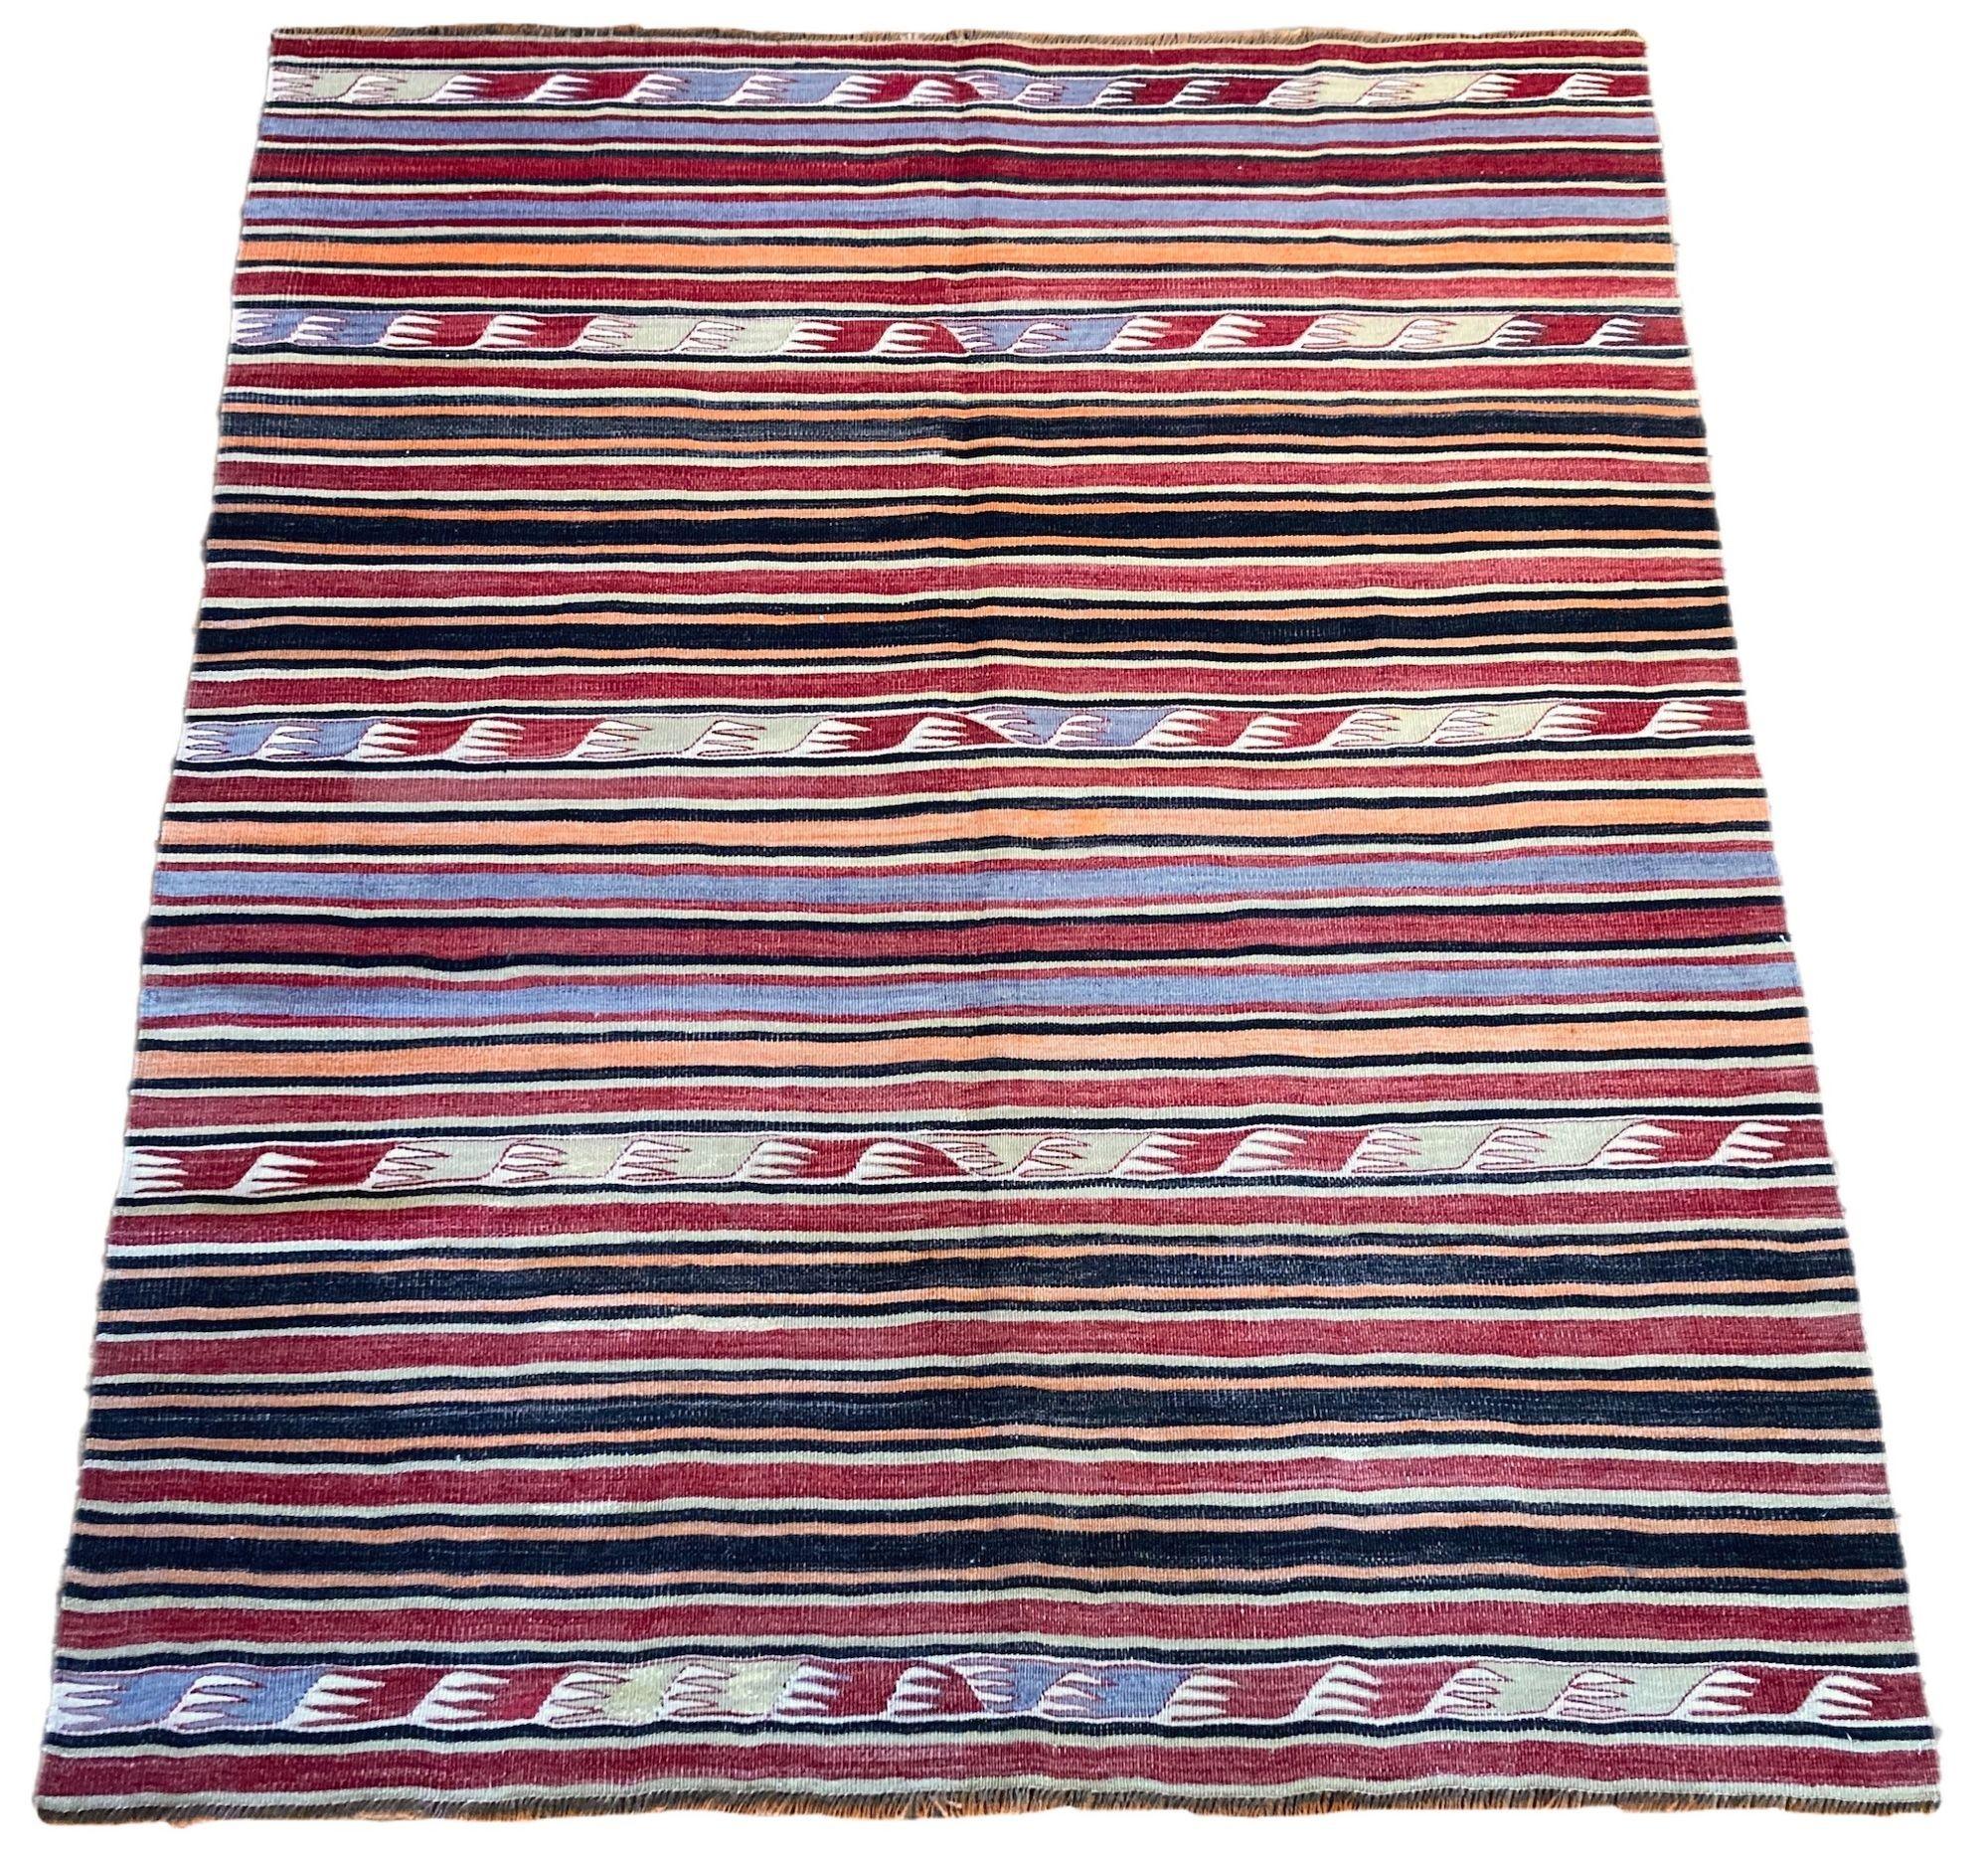 A lovely vintage kilim, handwoven in central Turkey circa 1960 featuring a traditional multicoloured banded design in reds, blues and golds.
Size: 1.80m x 1.51m (5ft 11in x 5ft)
This kilim is in good condition with light, age related wear. The